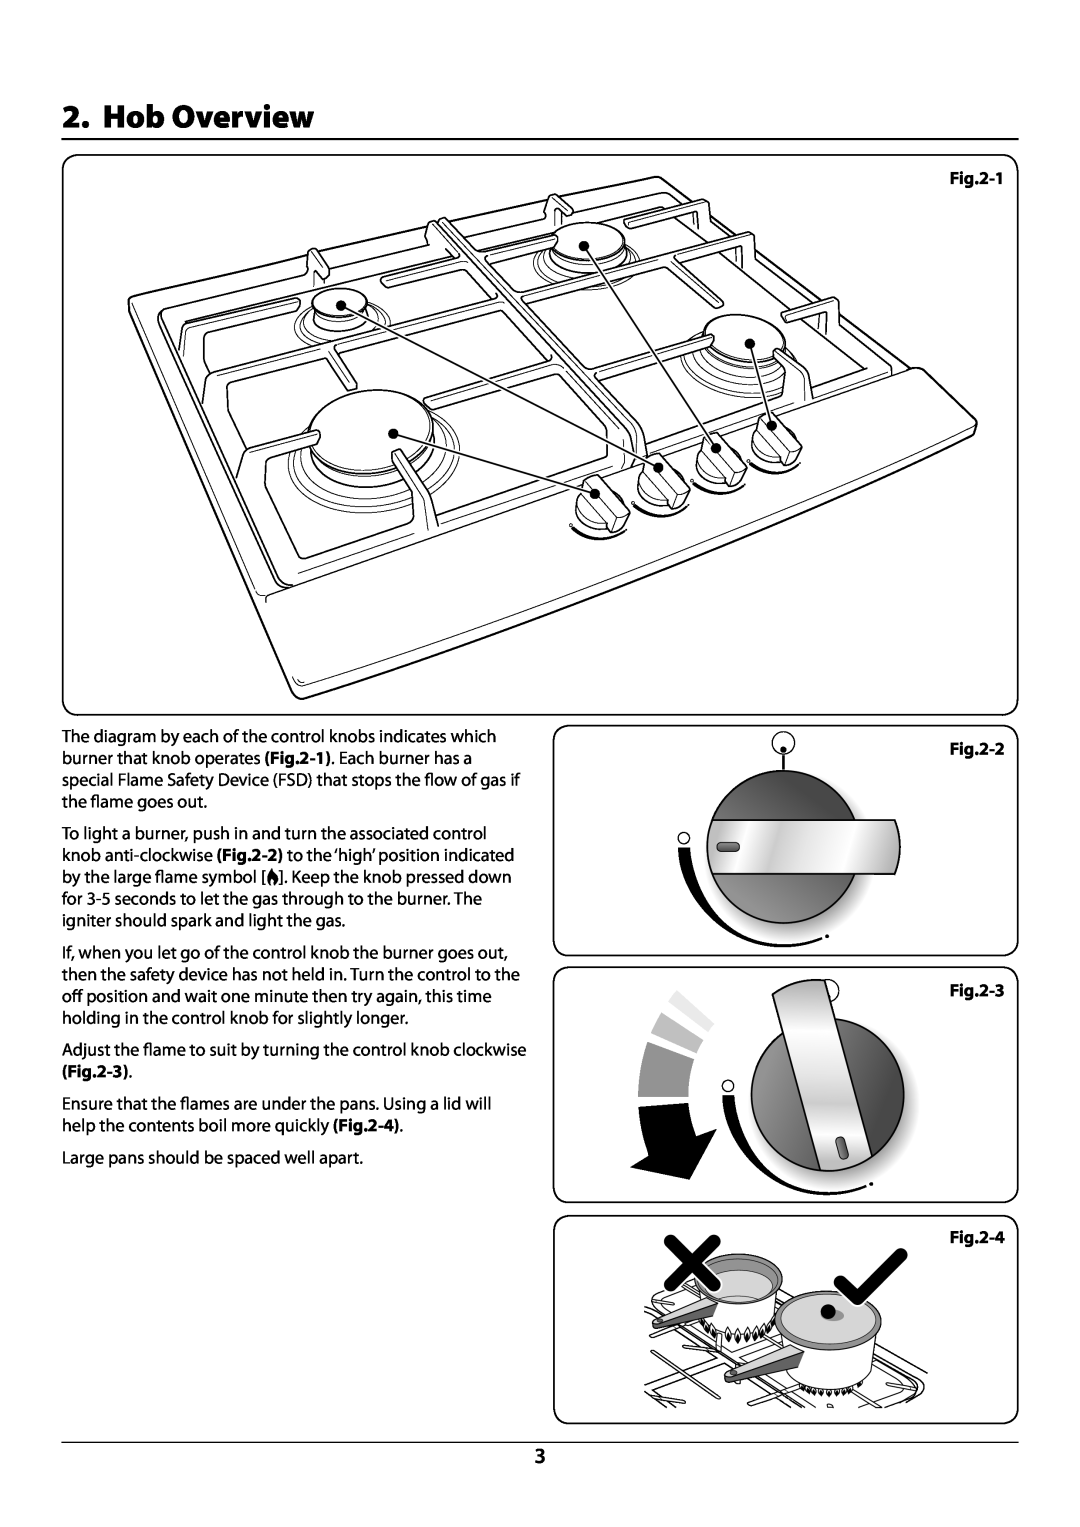 Rangemaster manual Hob Overview, DocNo.021-0001 - Overview RG60 gas 